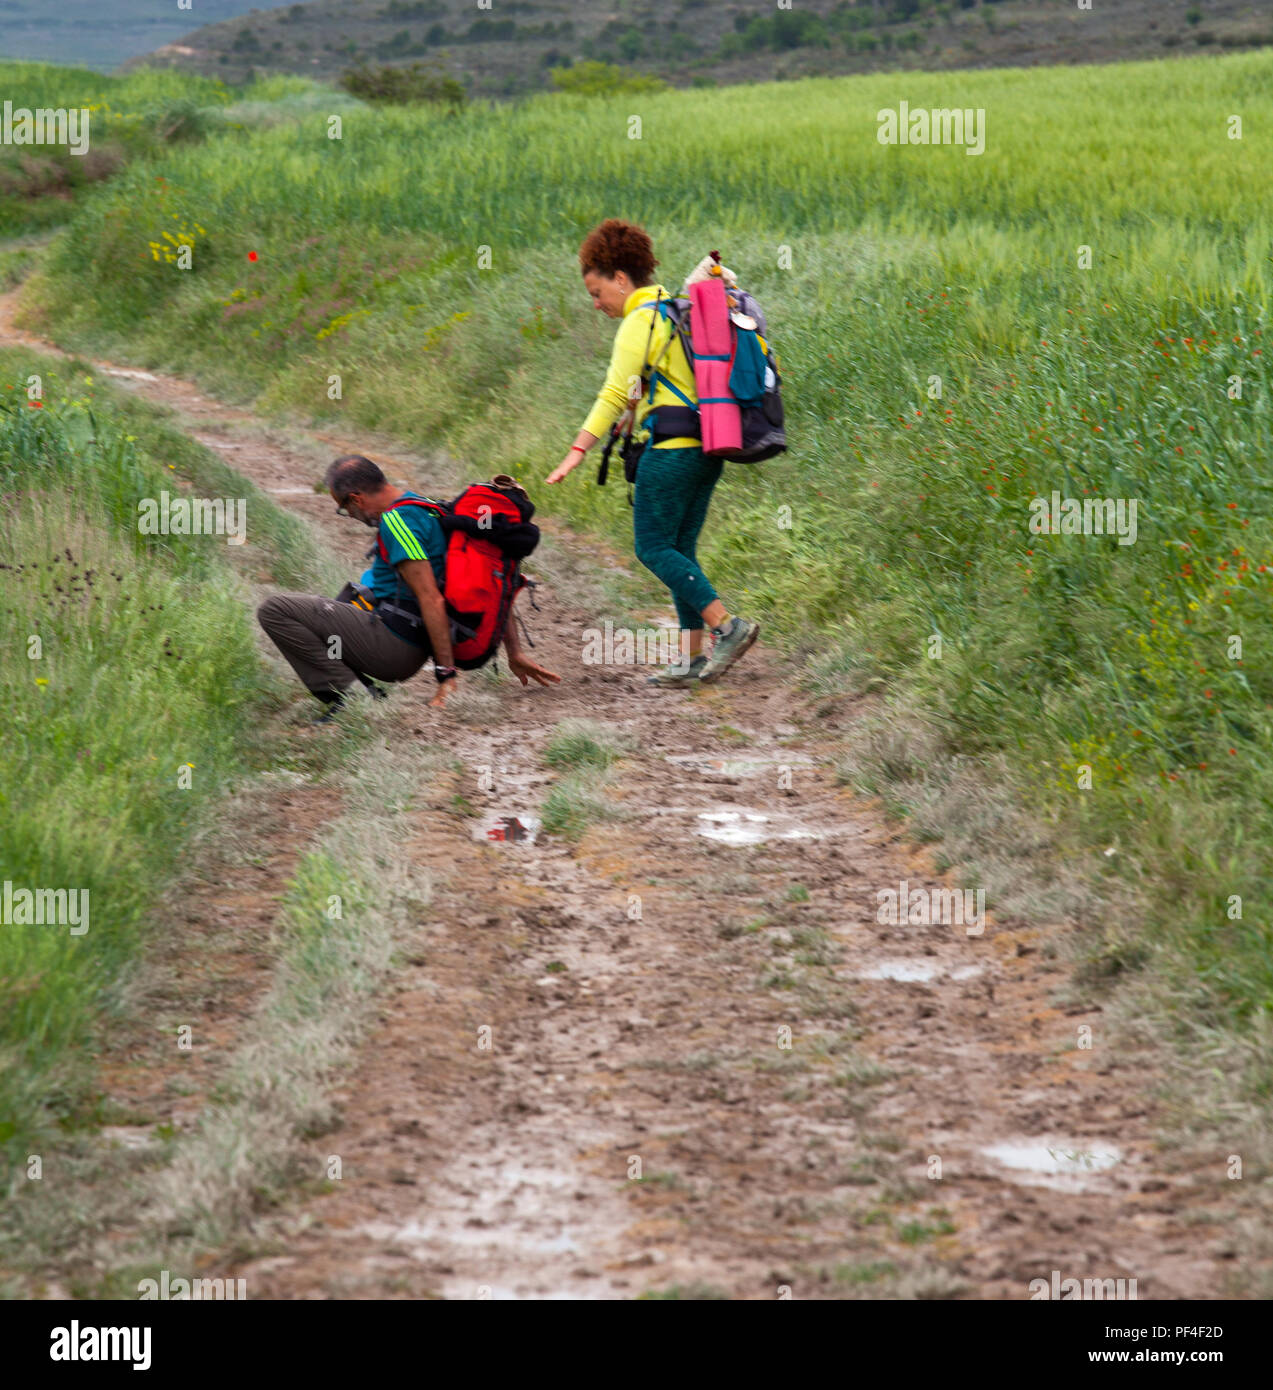 Pilgrim slipped fell over in mud while walking the Spanish Camino de Santiago the way of St James pilgrimage route Spain Stock Photo